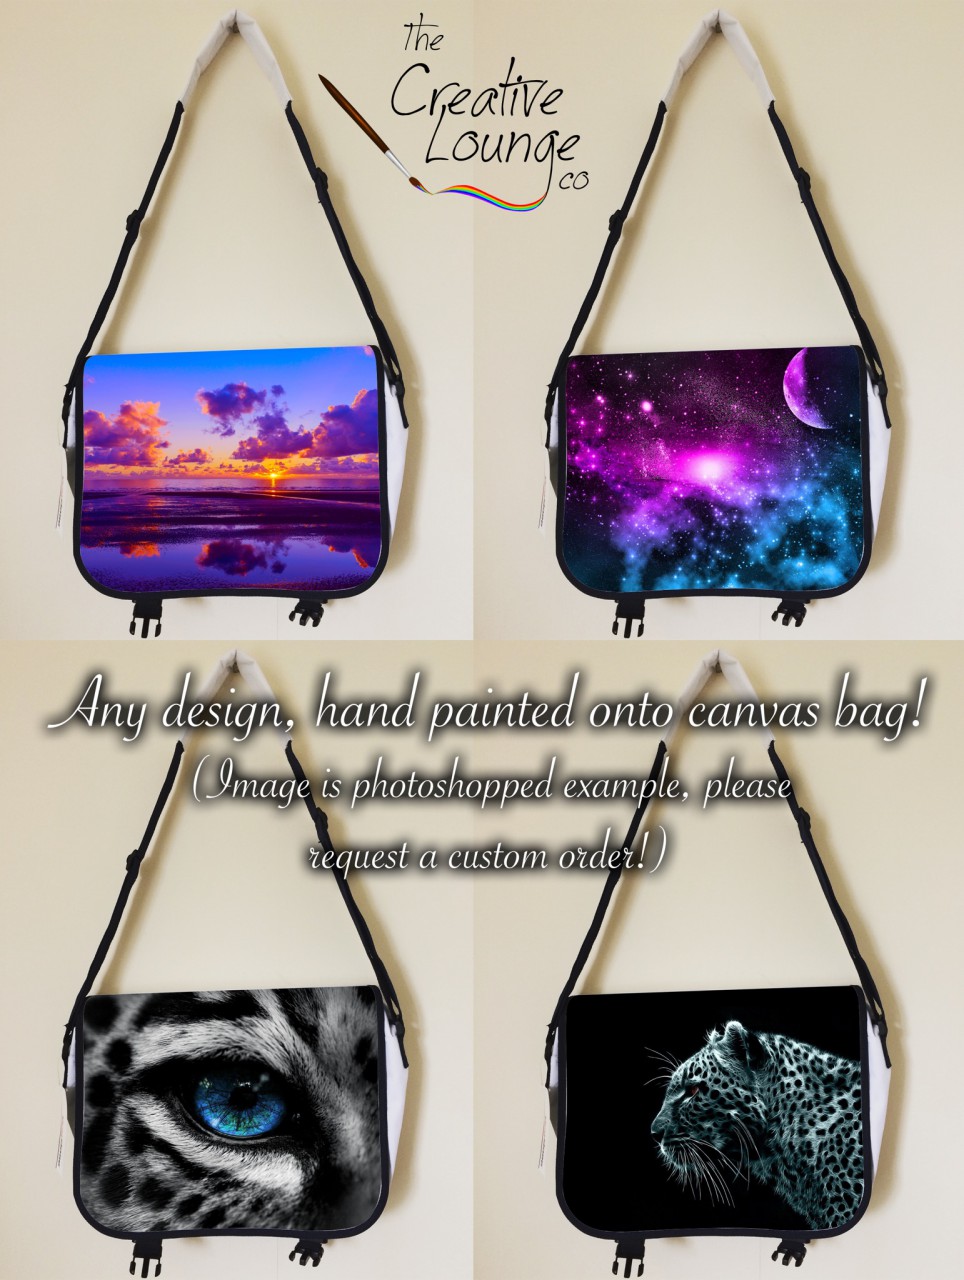 Very Amazing And Creative Hand Painted Bags Designs ~ You Can Make